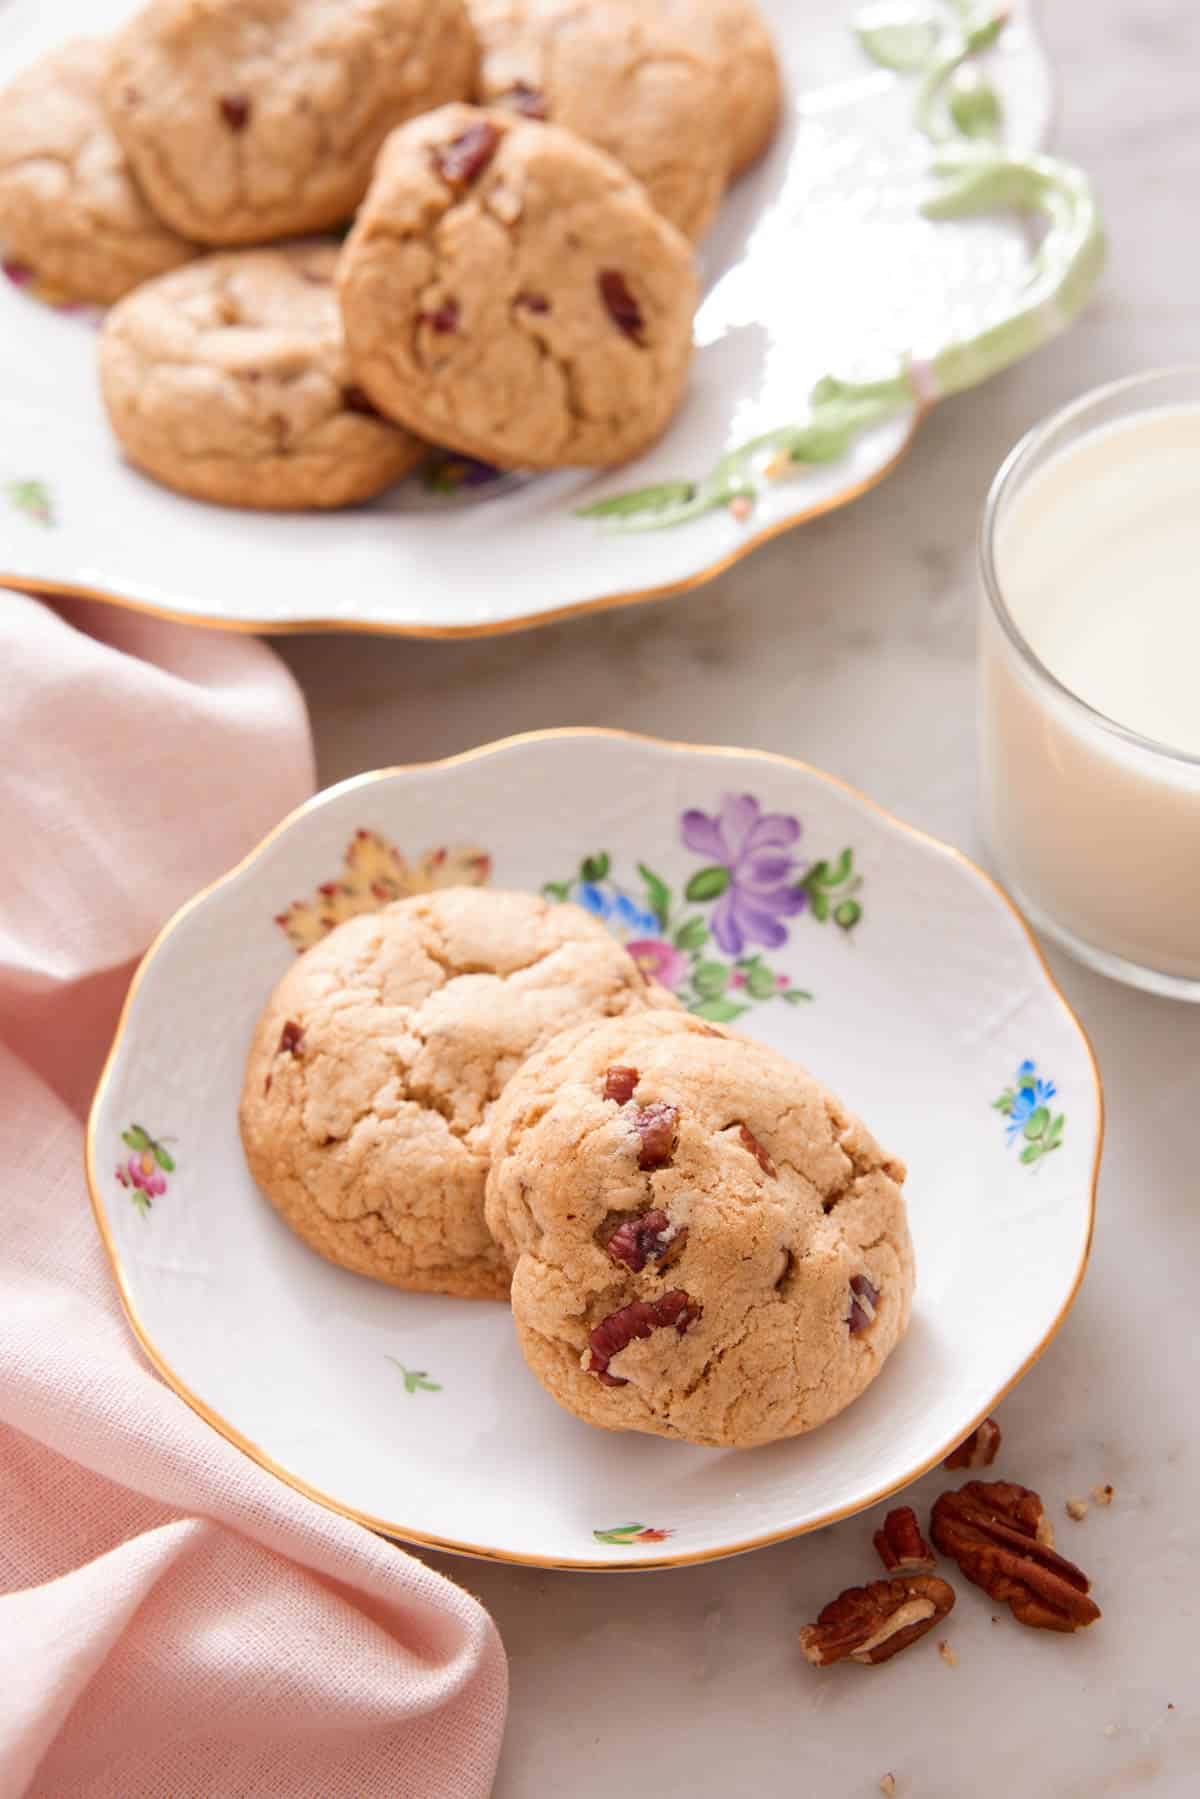 Two butter pecan cookies on a plate with a glass of milk and platter in the background.